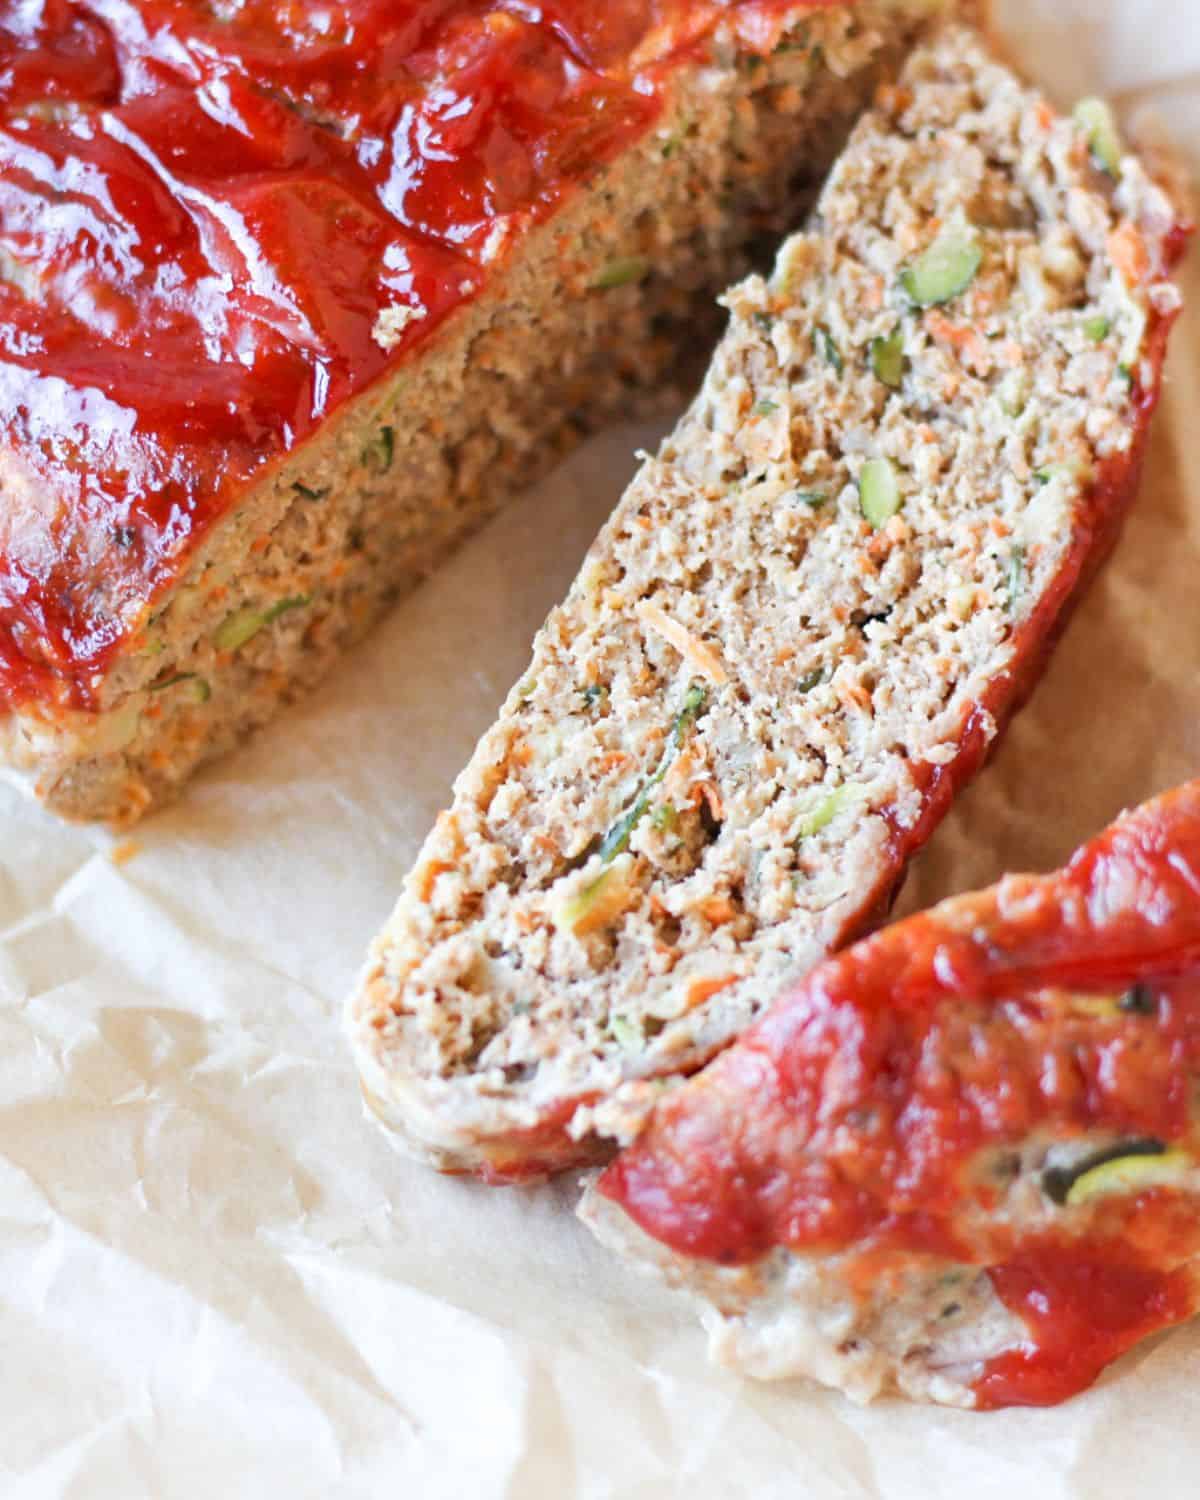 A slice of meatloaf with tomato glaze laying flat on parchment paper.